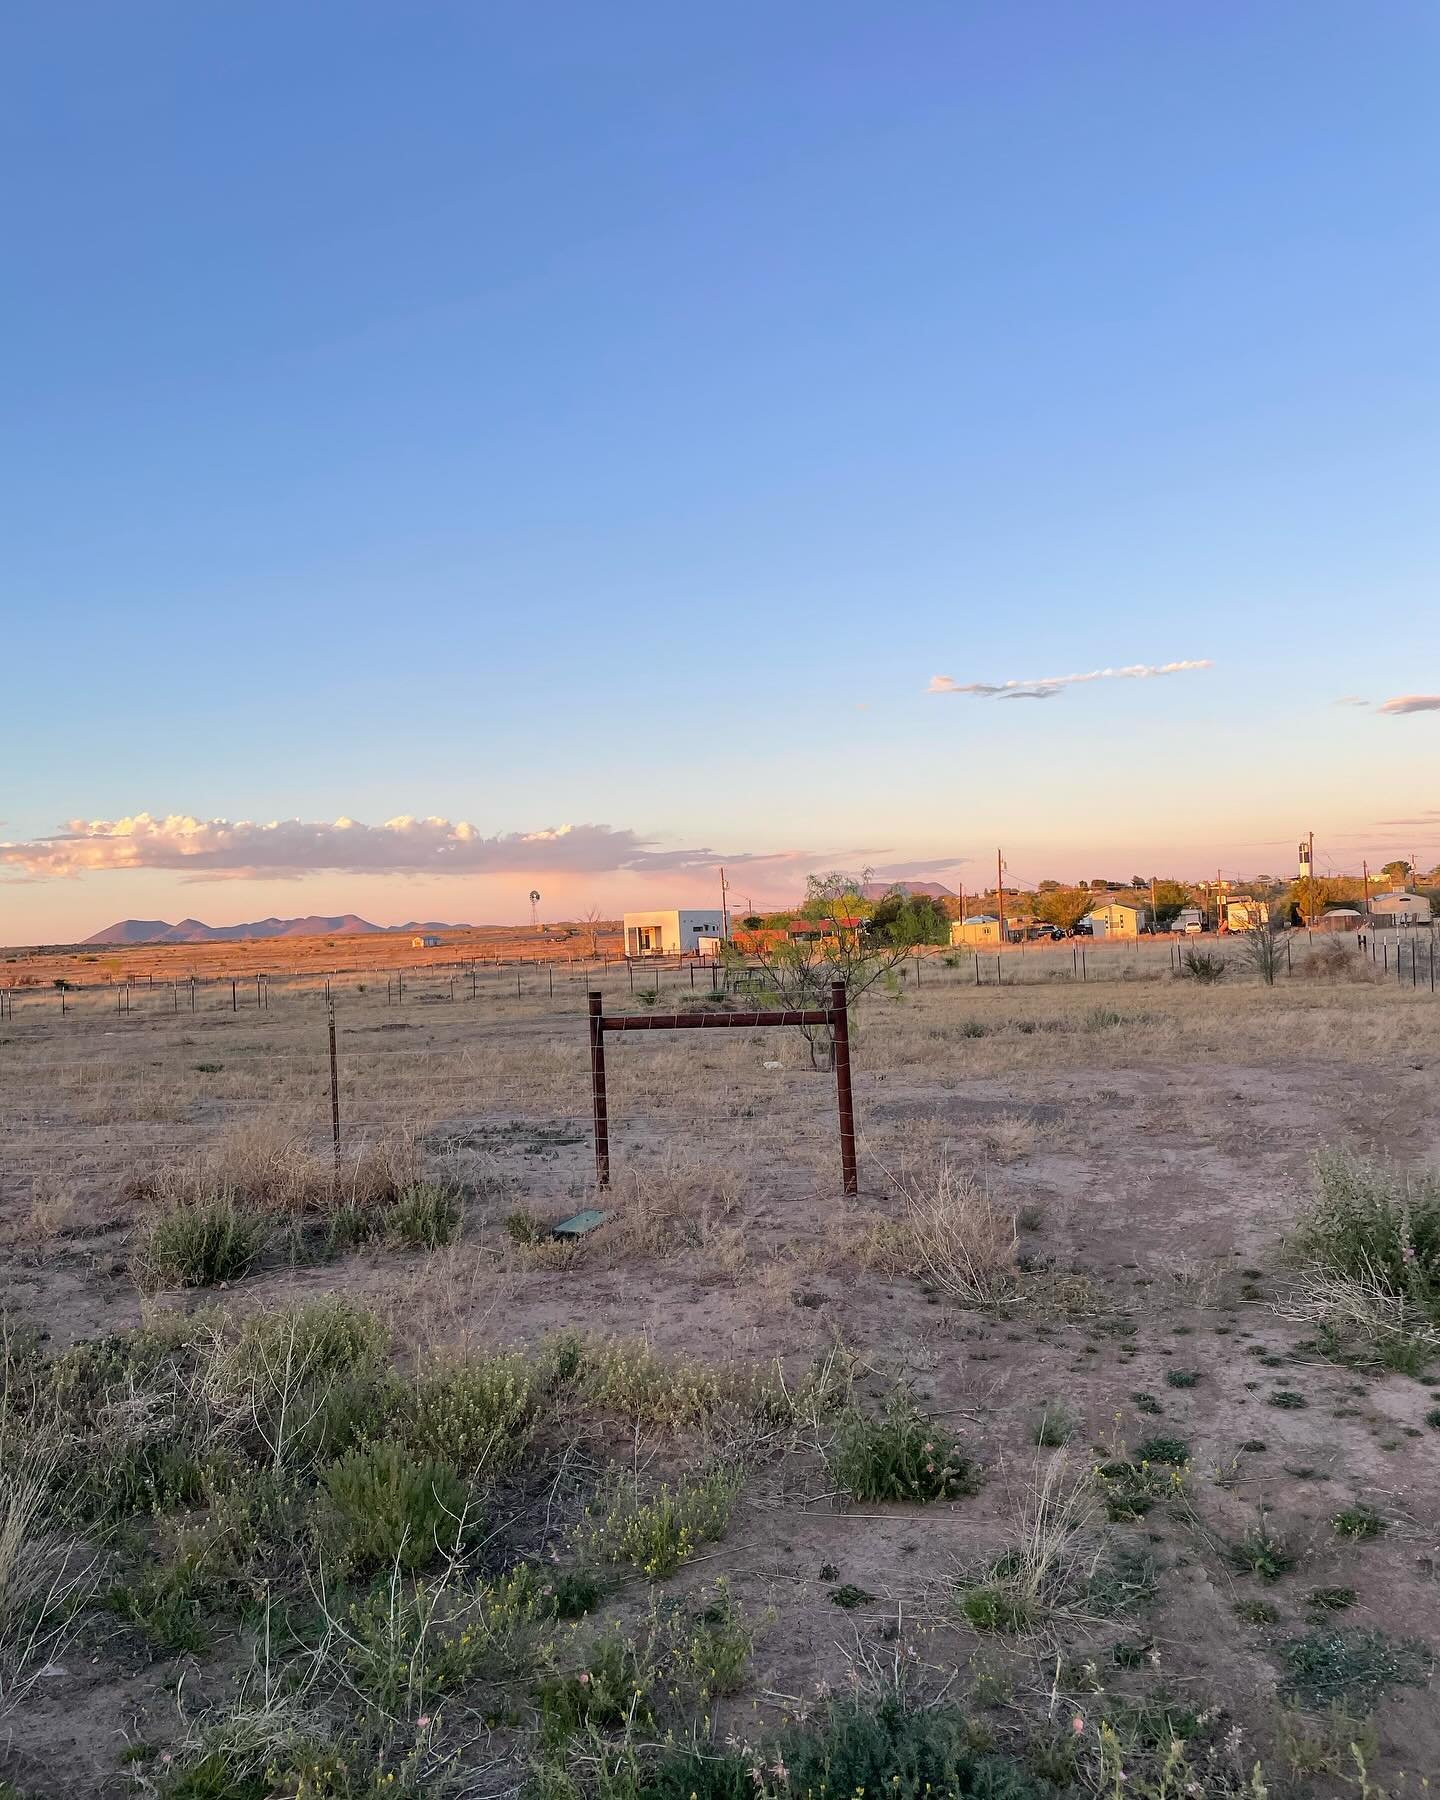 FRIENDLY PRICE 606 W 4th St. MARFA &amp; 1002 N Plateau St. MARFA both ready for new build in this residentially zoned area of North West Marfa / buried electric / new city sewer connections / Electric / 9,000 sq ft for each adjacent lot / Offered at